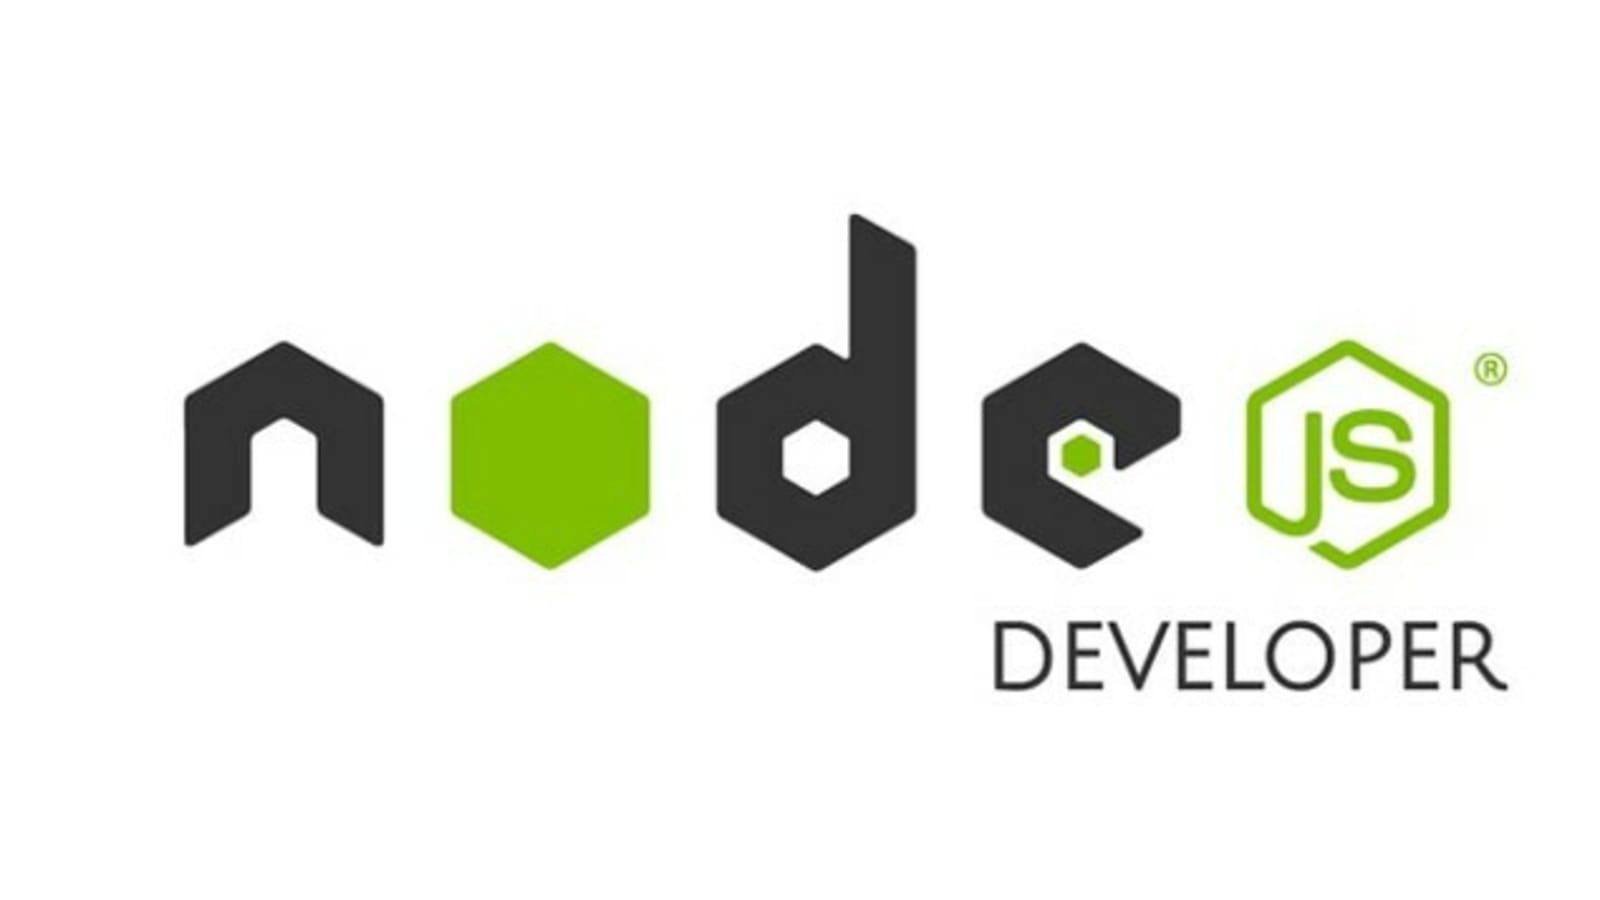 Getting started with Nodejs/Express - DEV Community